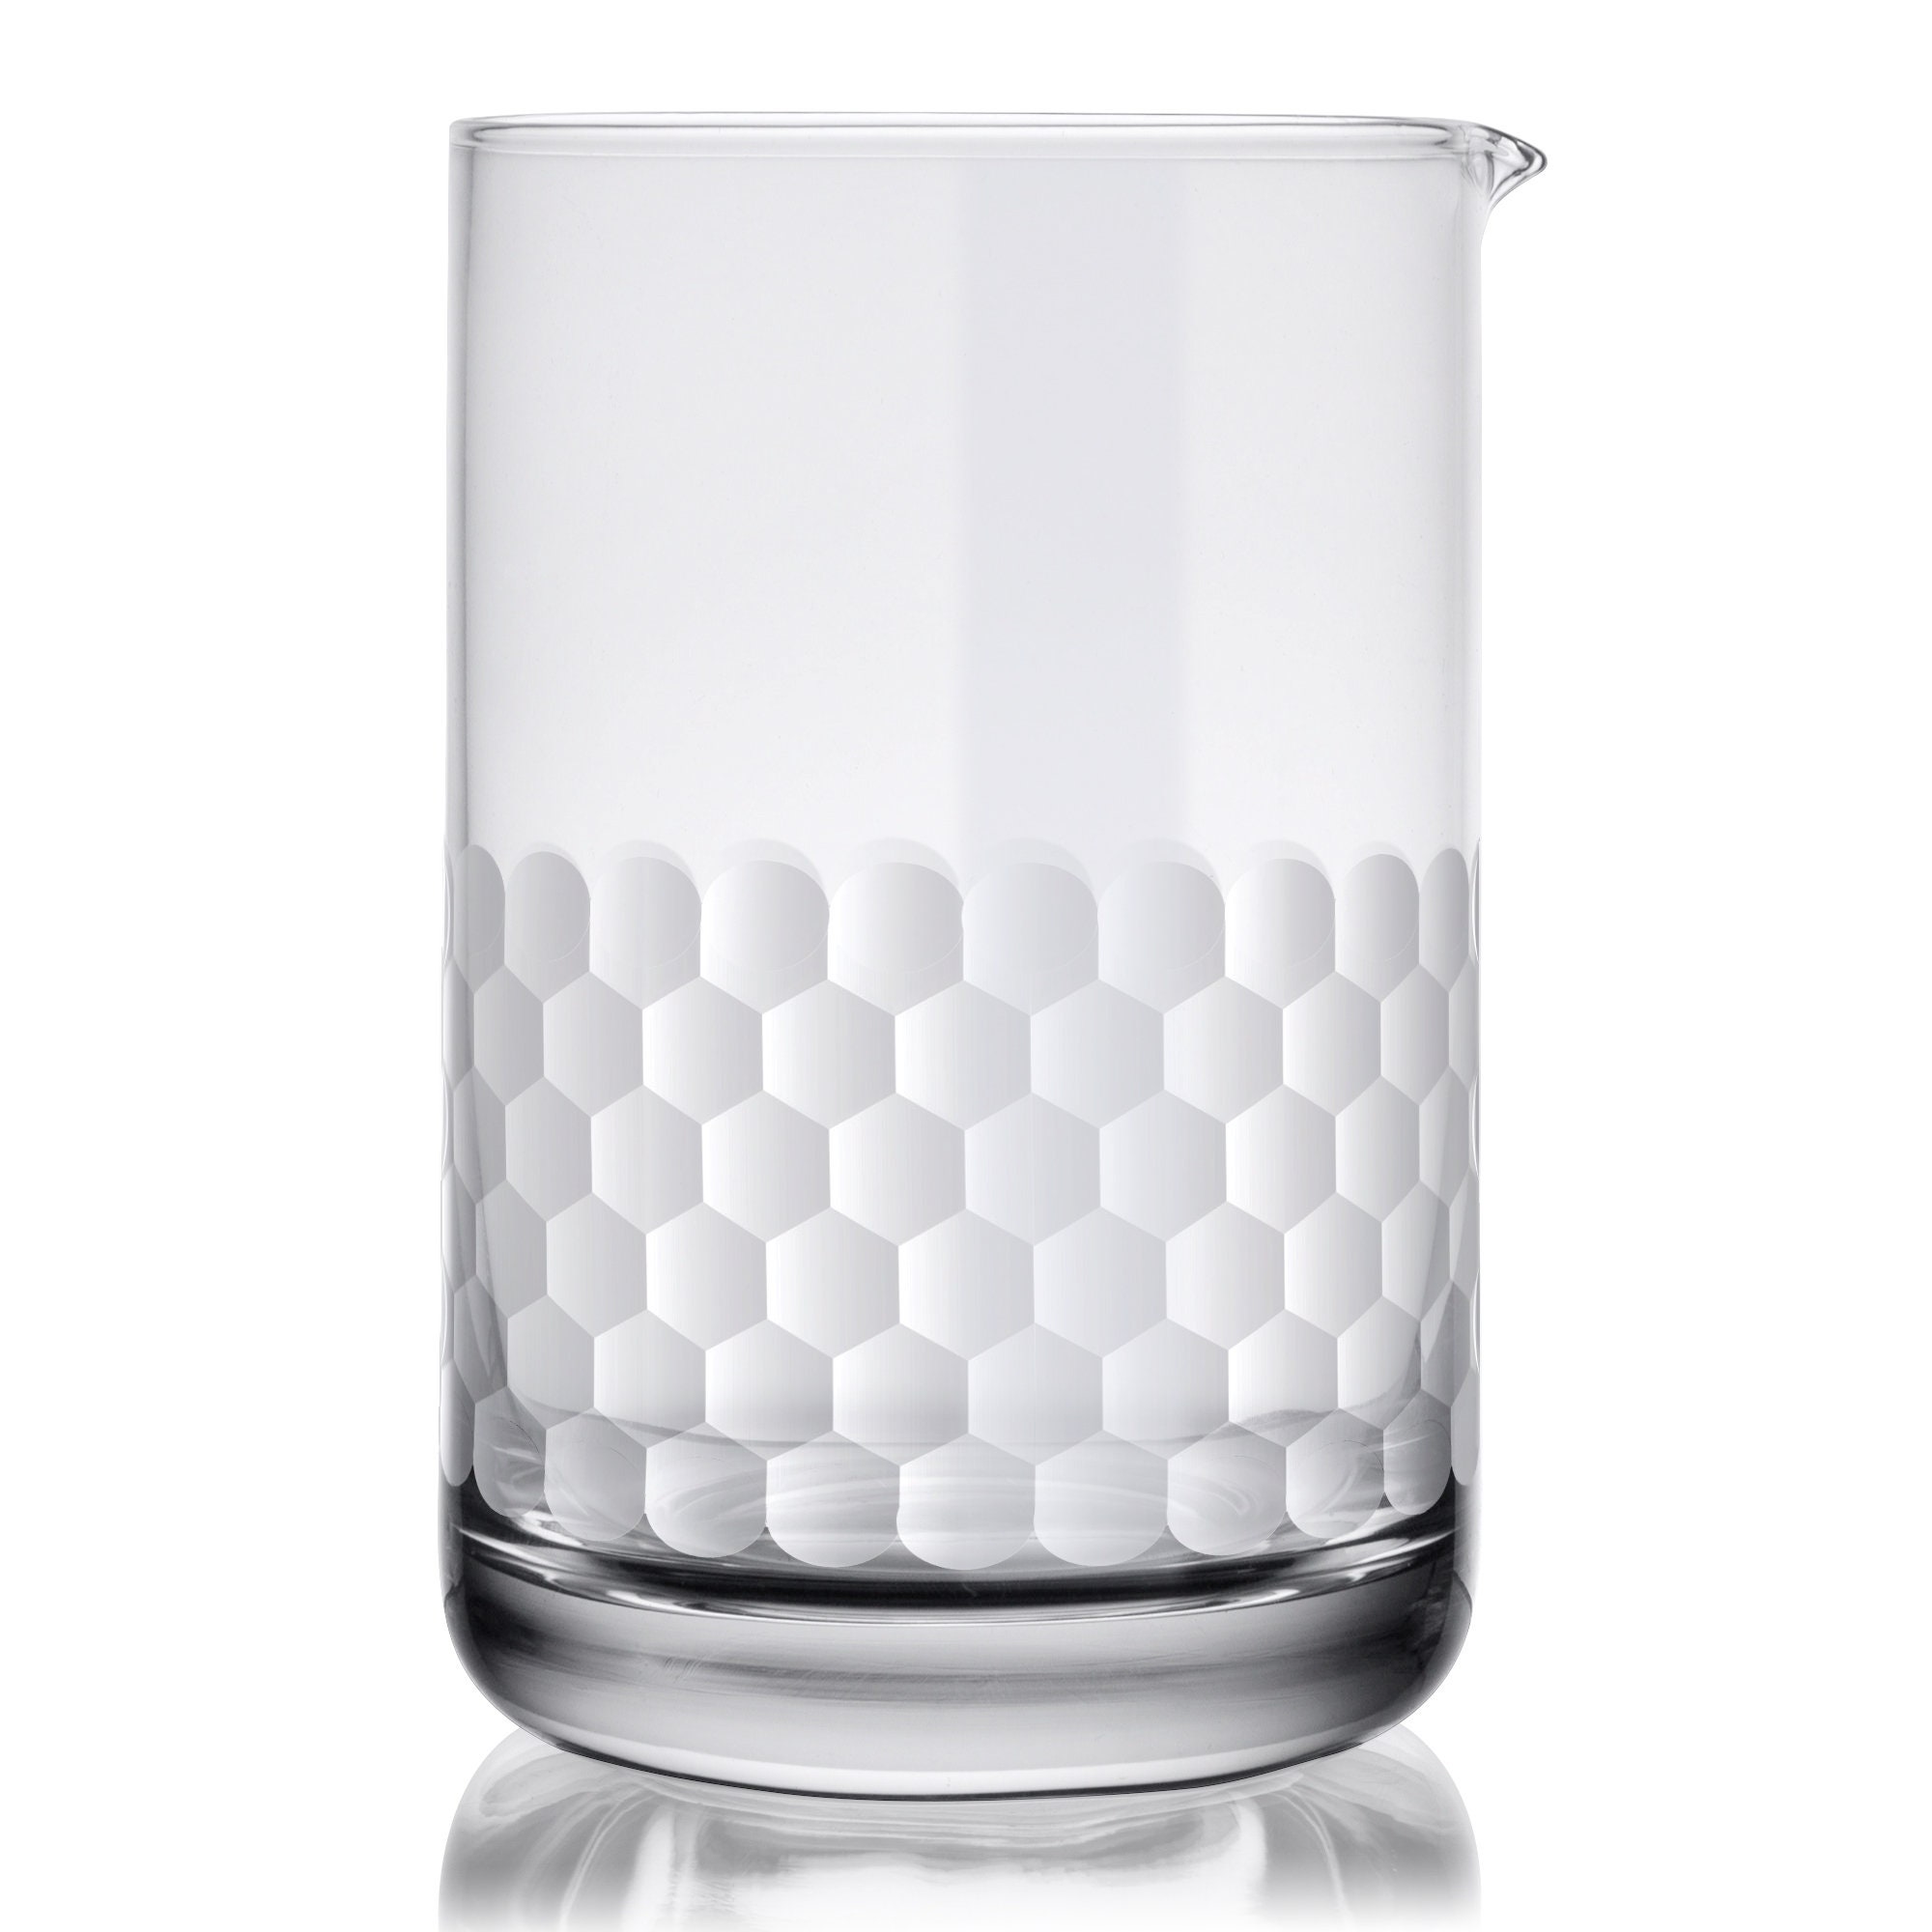 Bar Lux 17 oz Cocktail Mixing Glass - Hand-Blown, Crystal - 3 3/4 x 3 1/2  x 5 3/4 - 1 count box